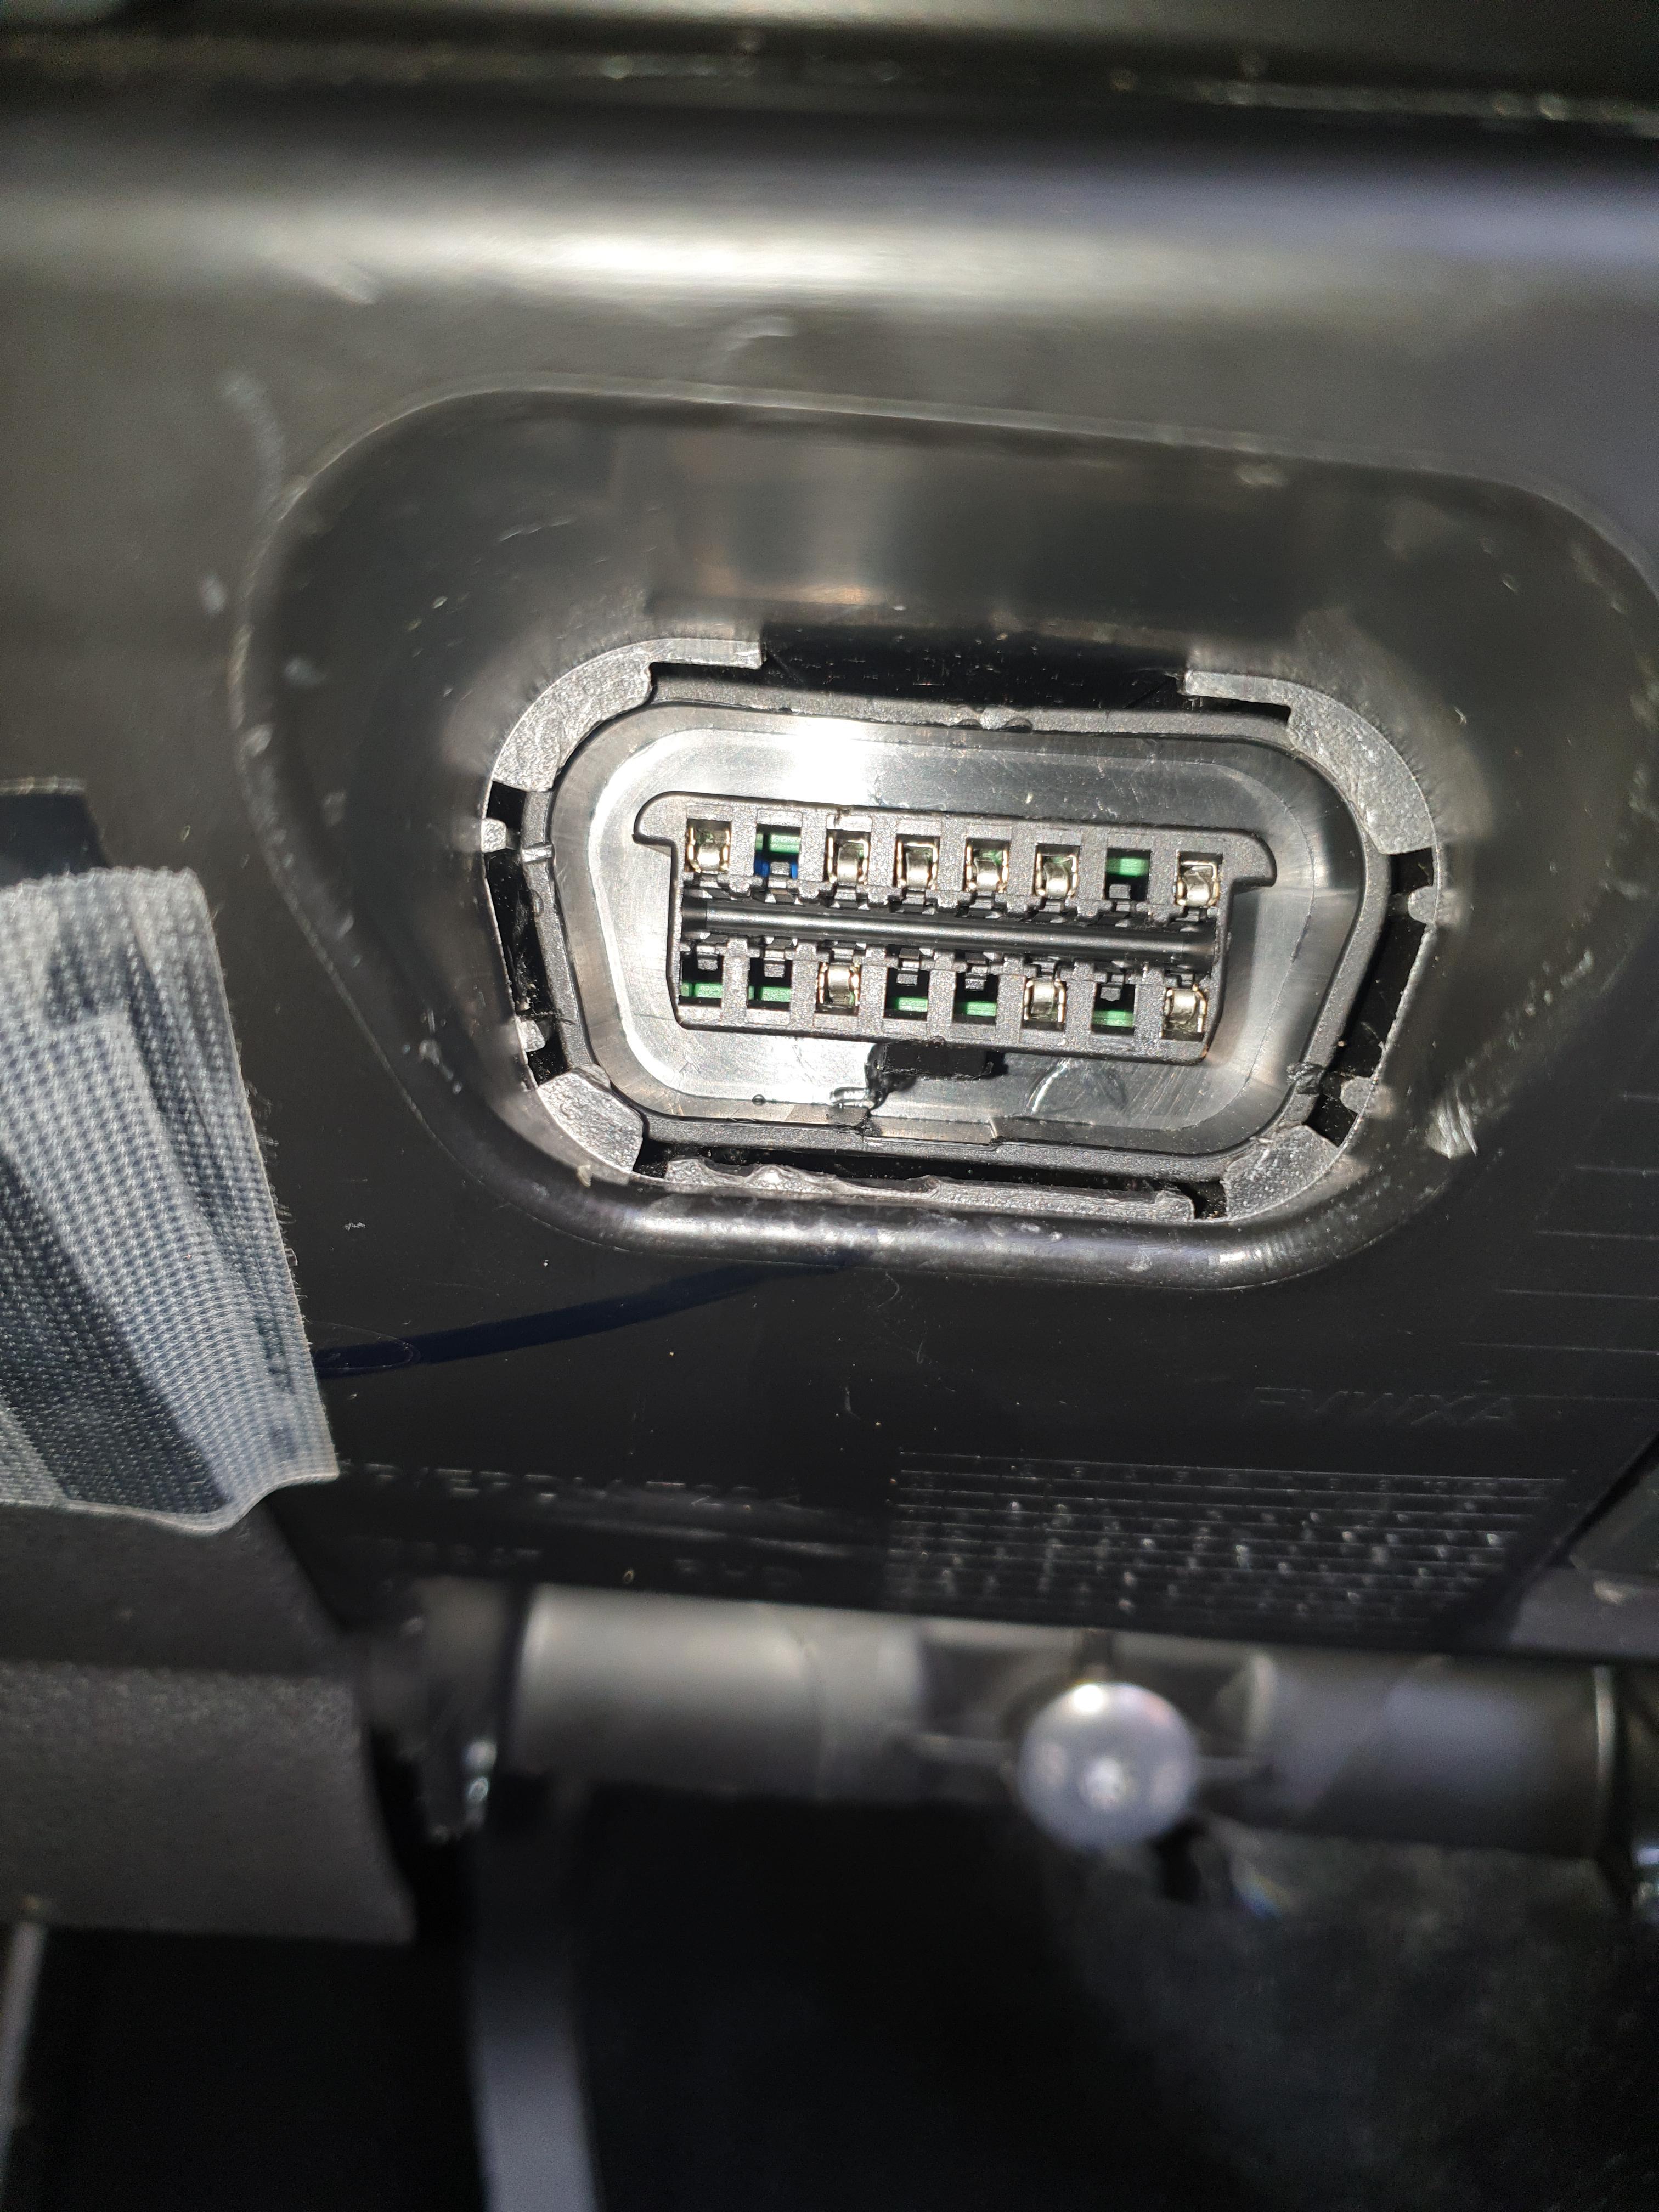 obd port has pushed through its holder . - Ford Kuga Club - Ford Owners  Club - Ford Forums